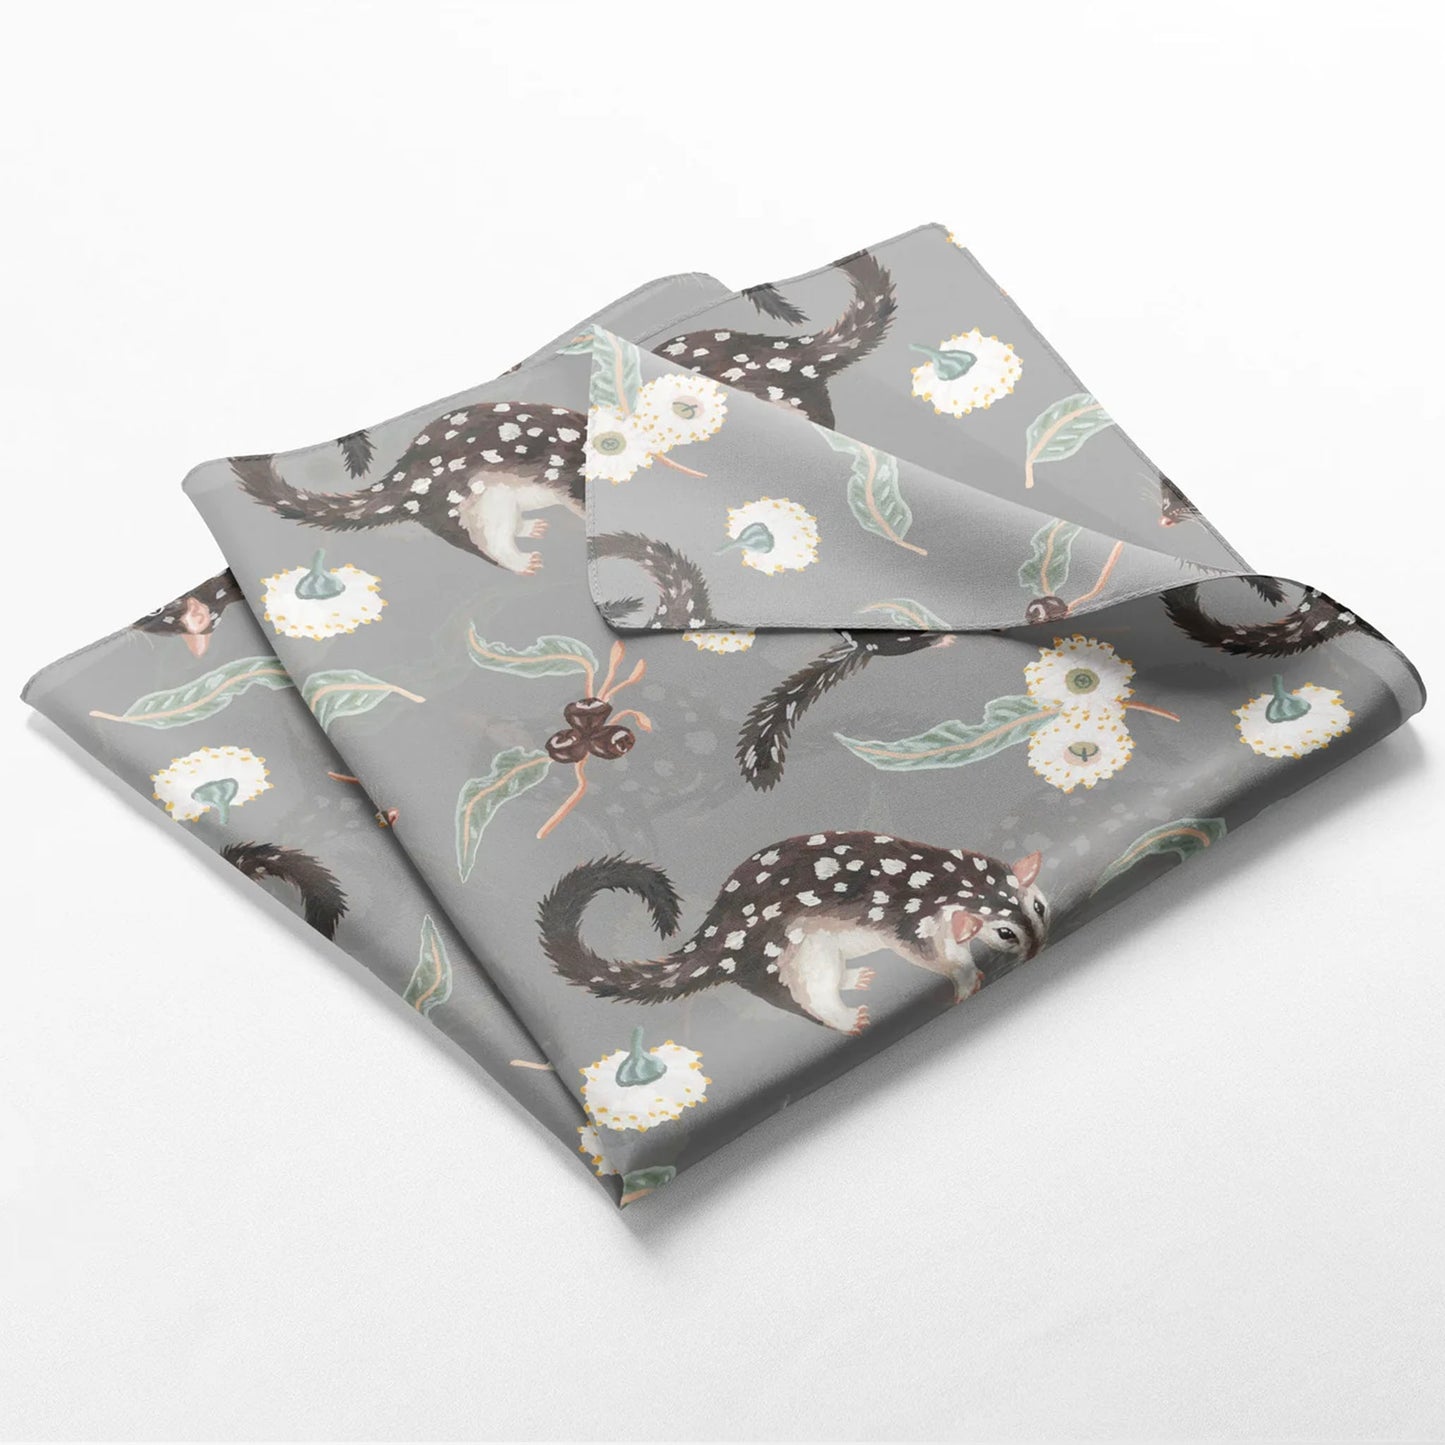 Australian Eastern Quoll and wildflower 65 x 65cm square silk cotton scarf.